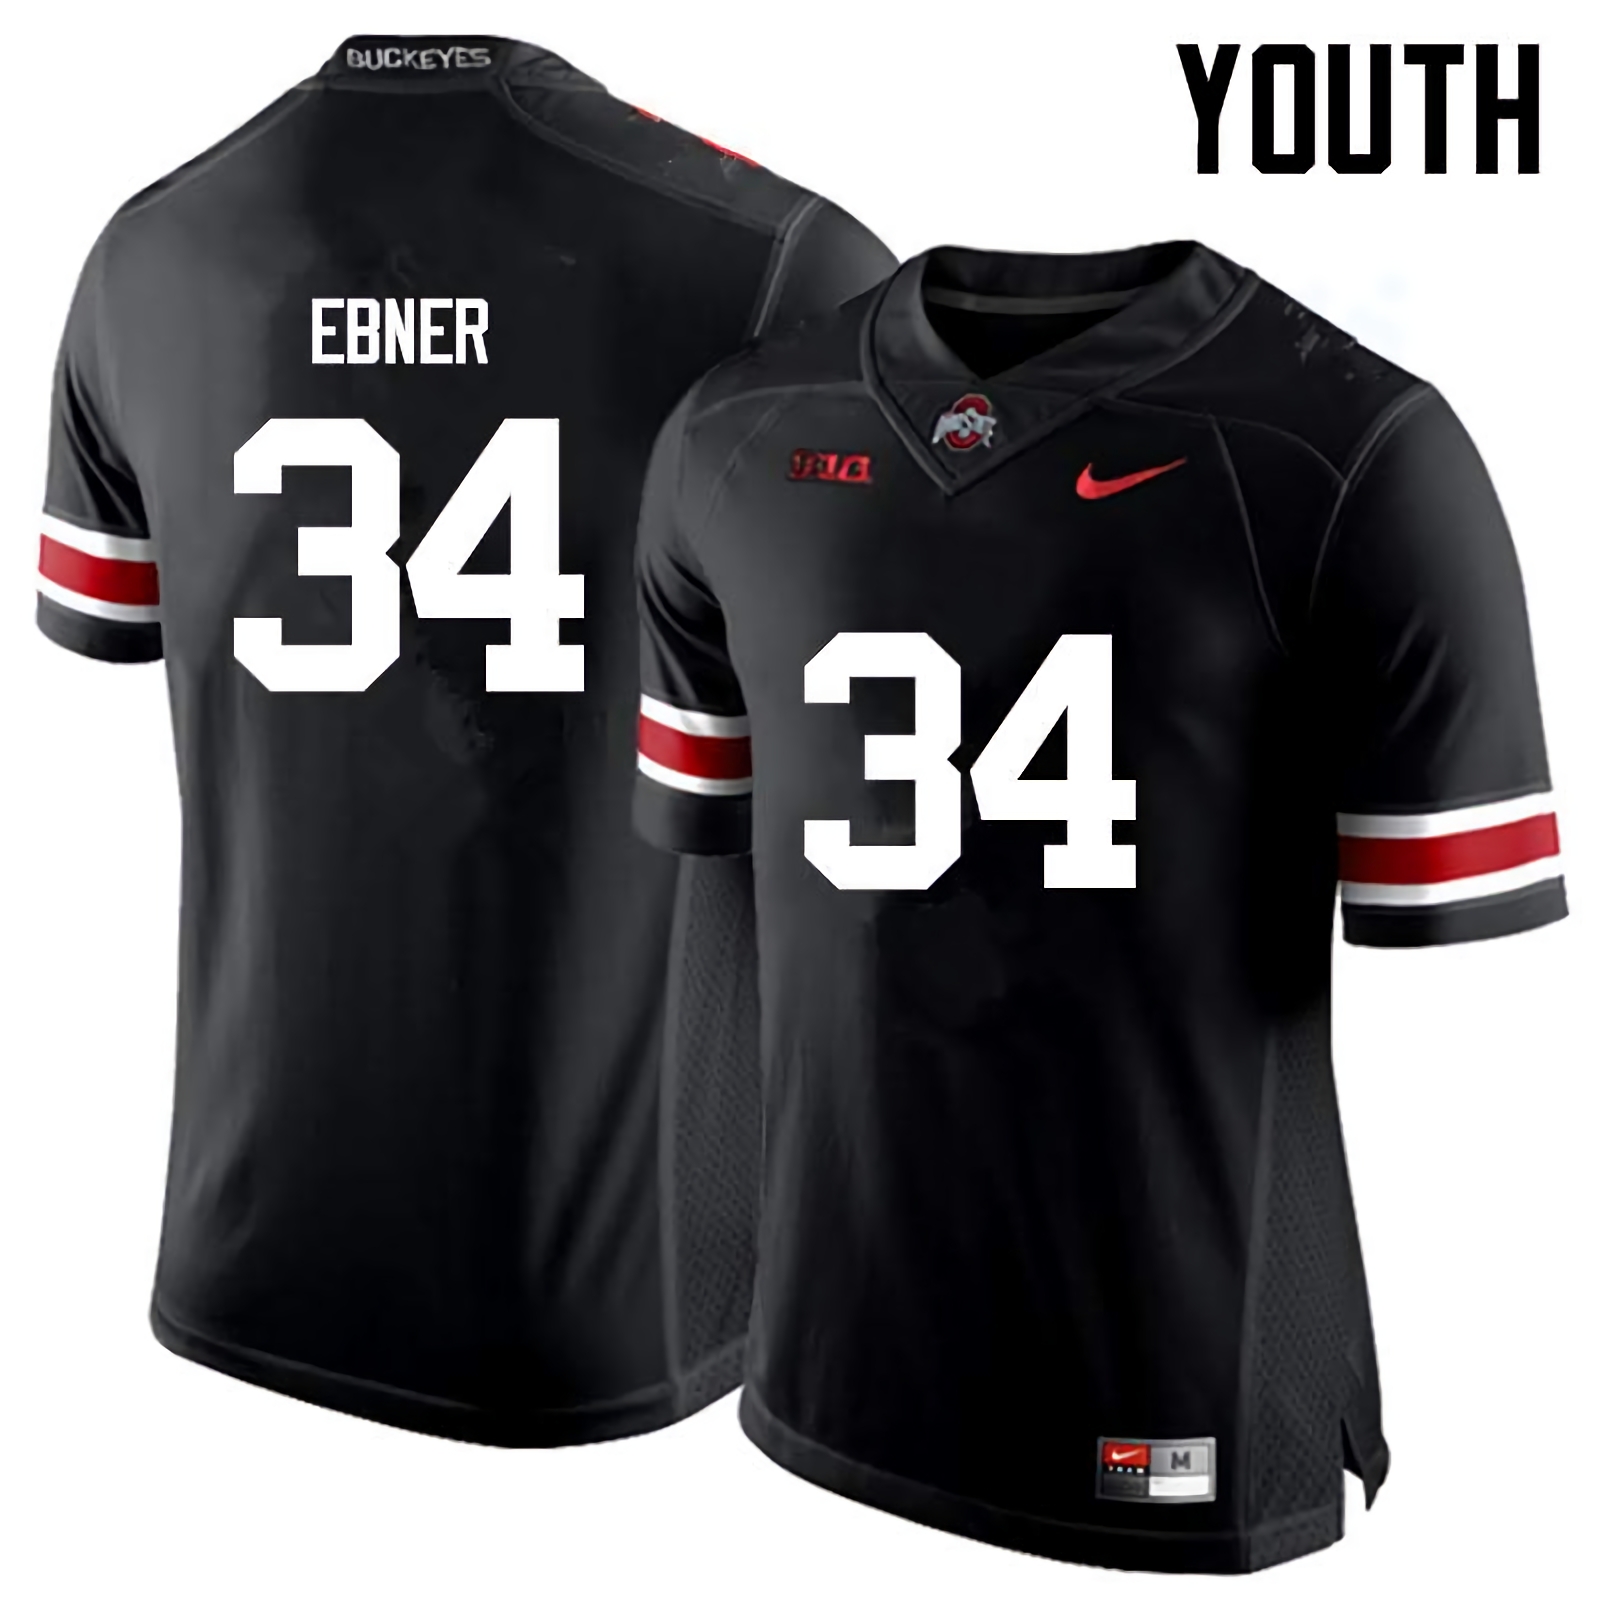 Nate Ebner Ohio State Buckeyes Youth NCAA #34 Nike Black College Stitched Football Jersey LHD3056JD